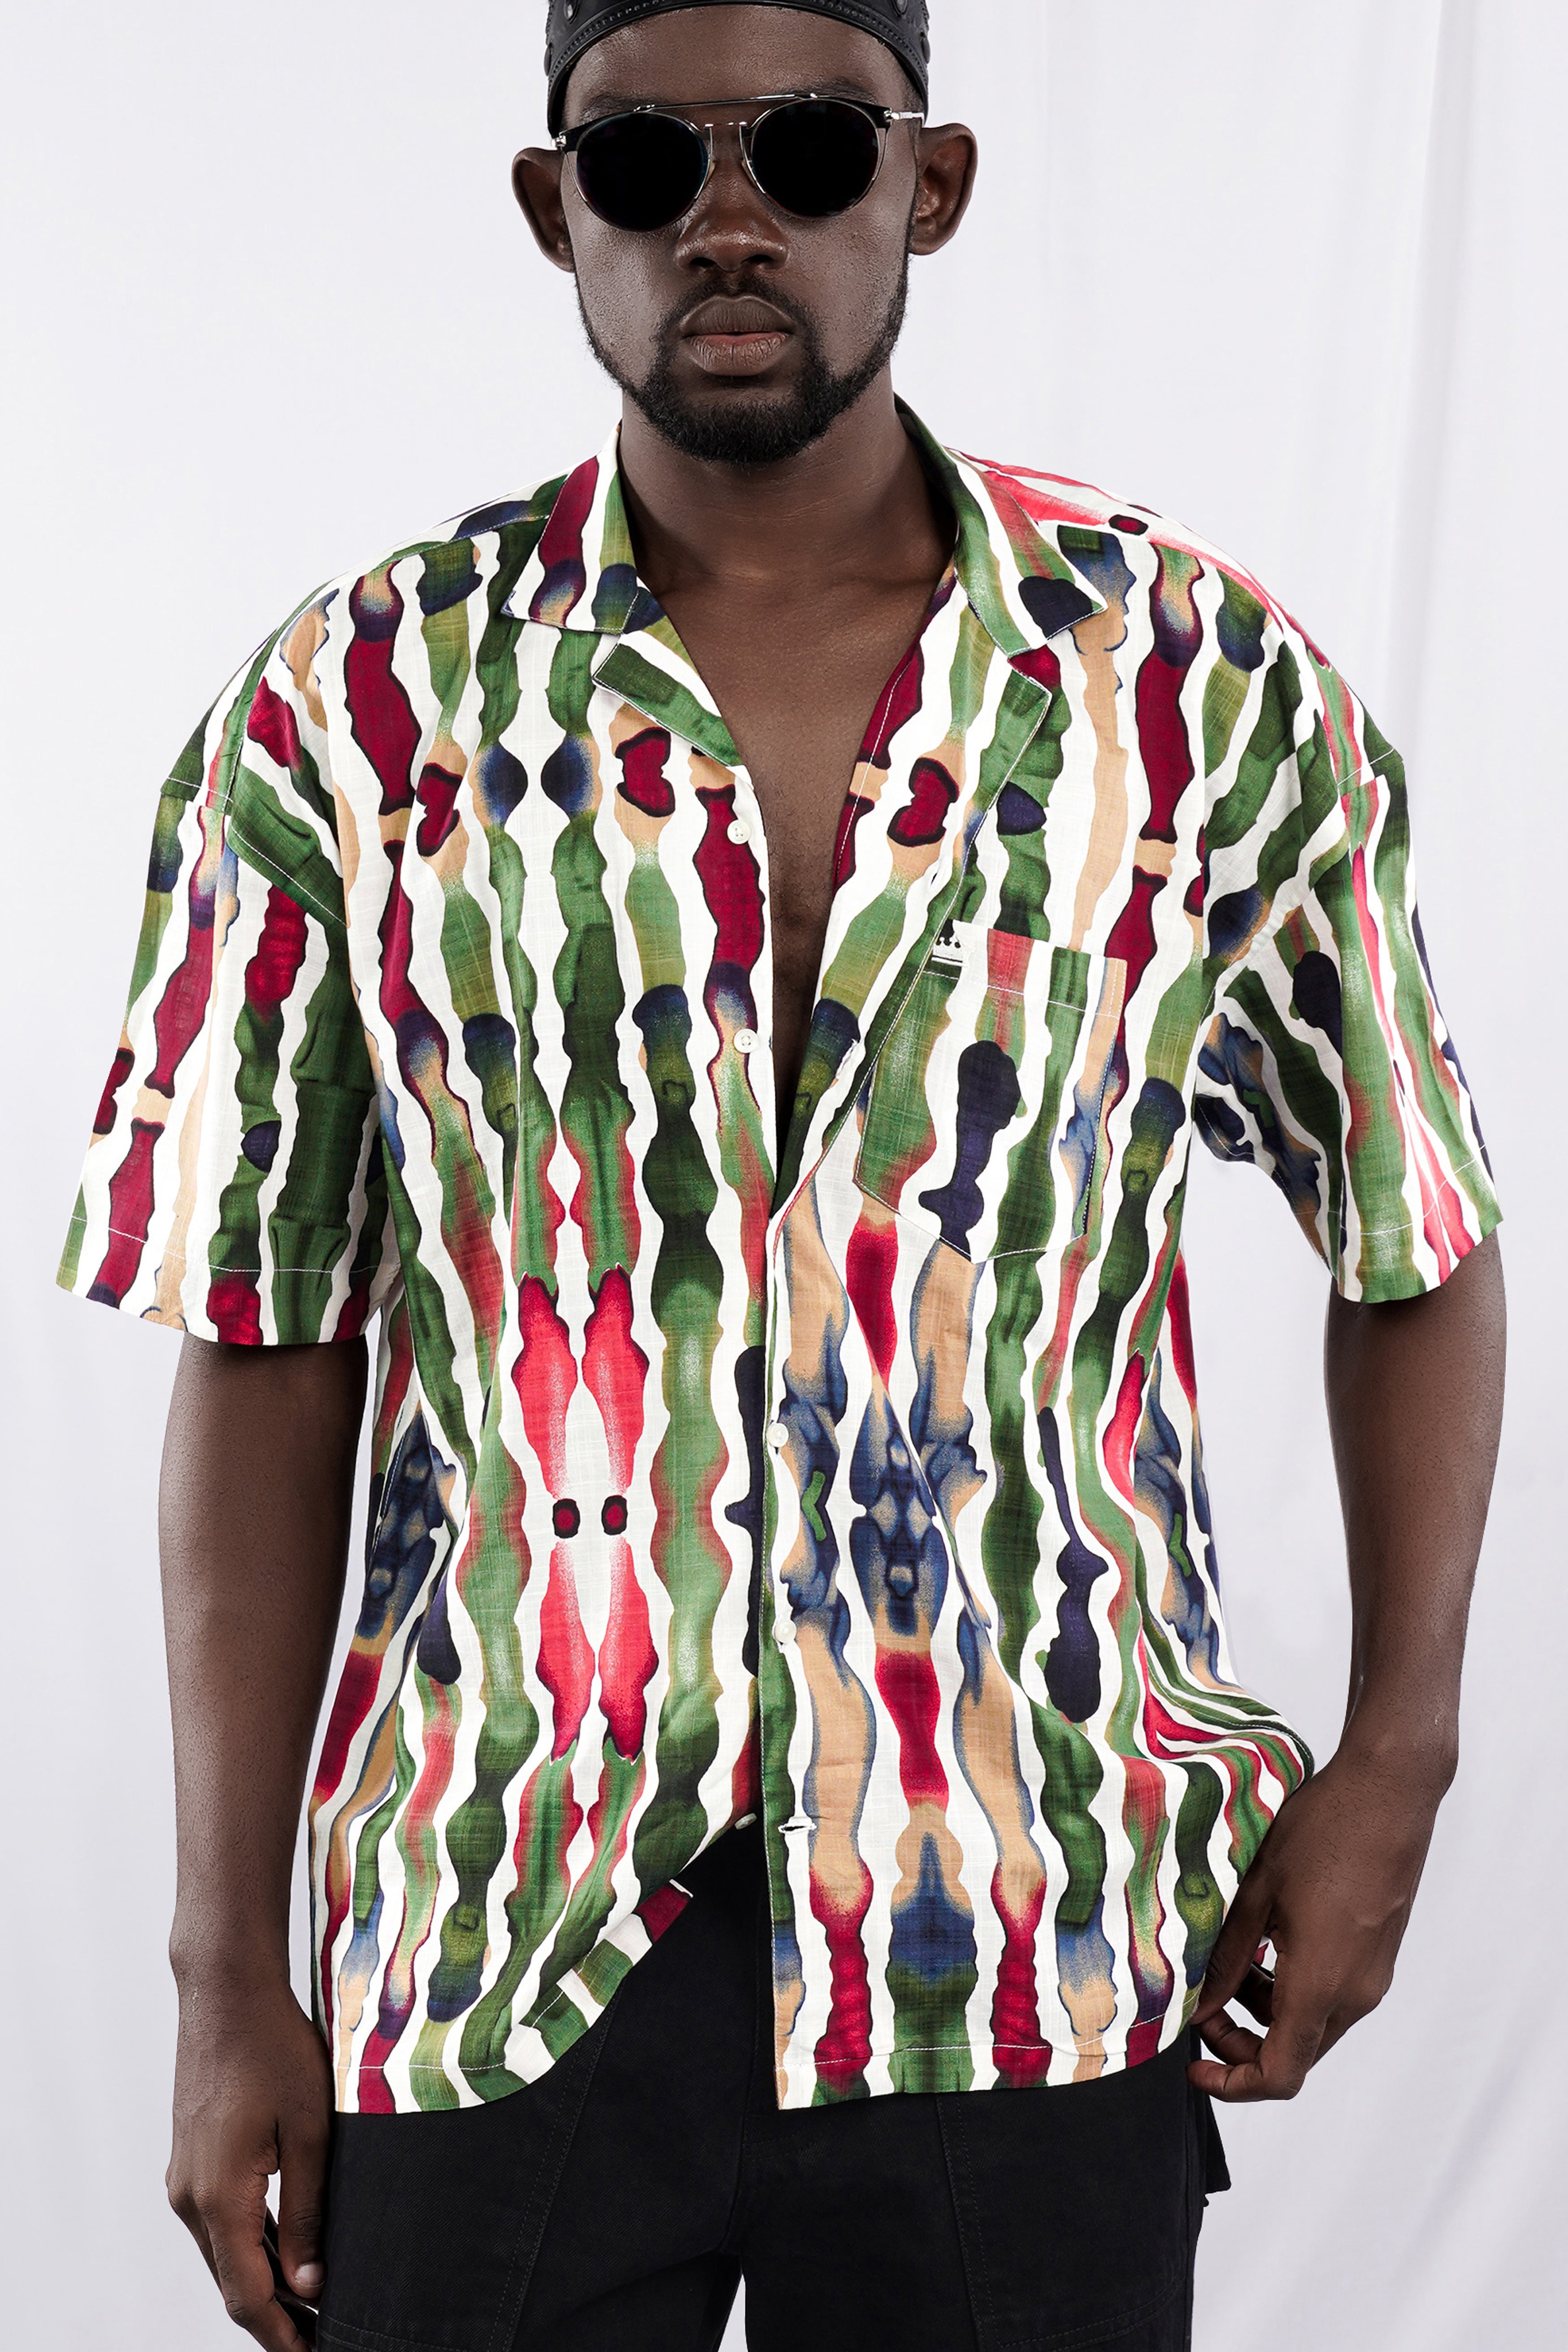 Asparagus Green with Bright White Funky Printed Lightweight Premium Cotton Oversized Shirt